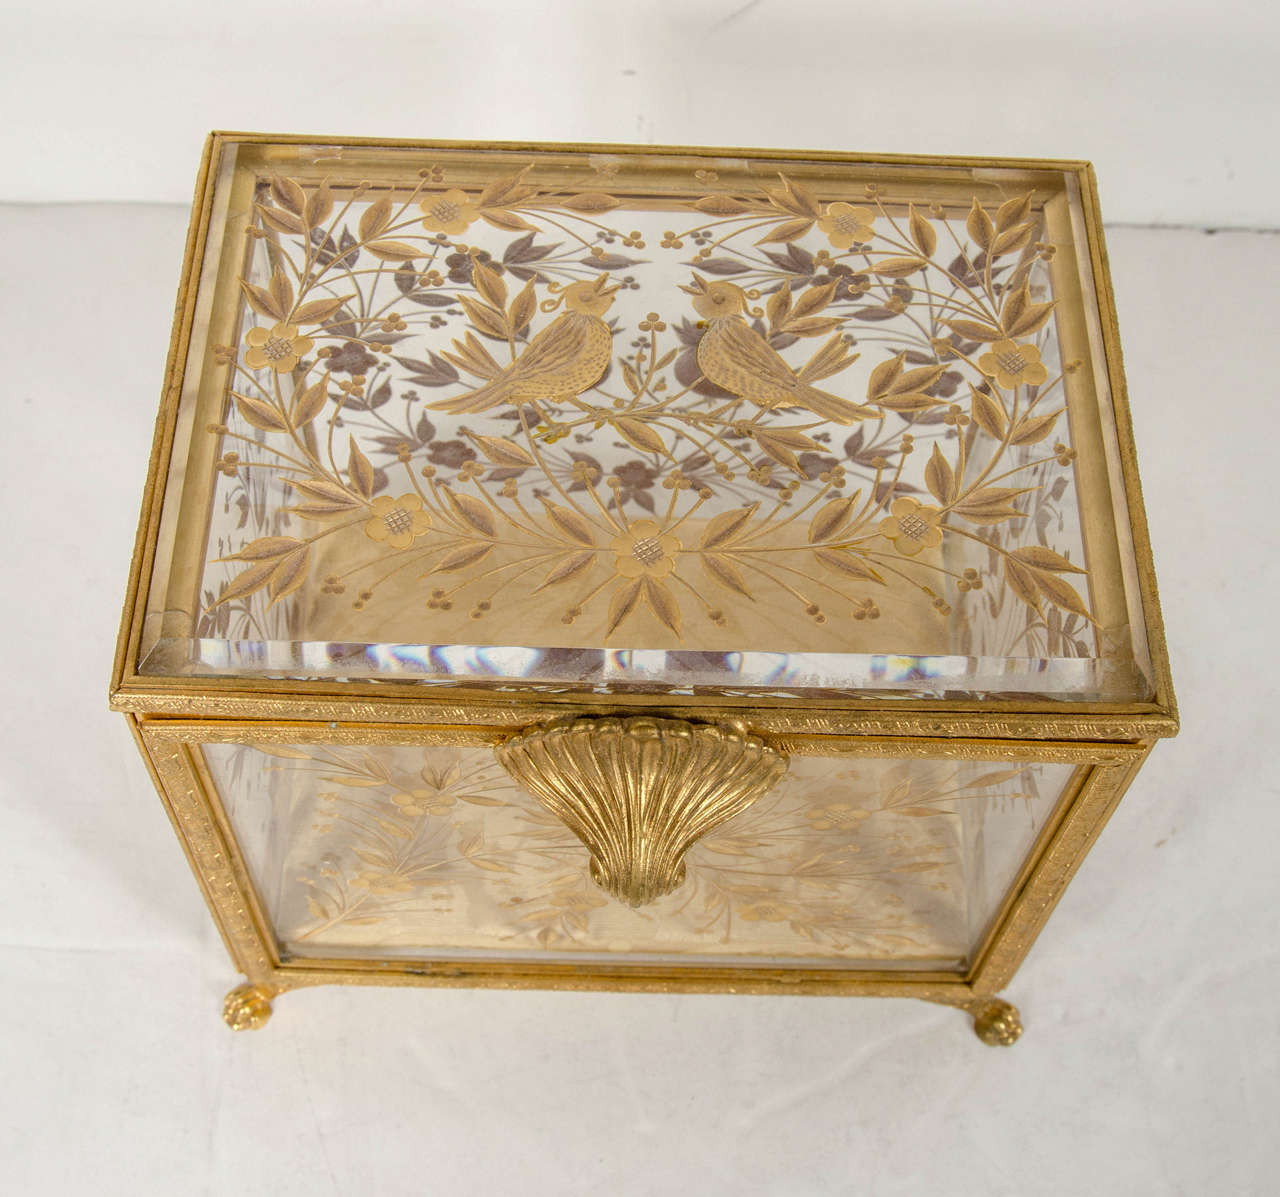 Exquisite French Empire Bronze Ormolu Mounted Crystal Box 1